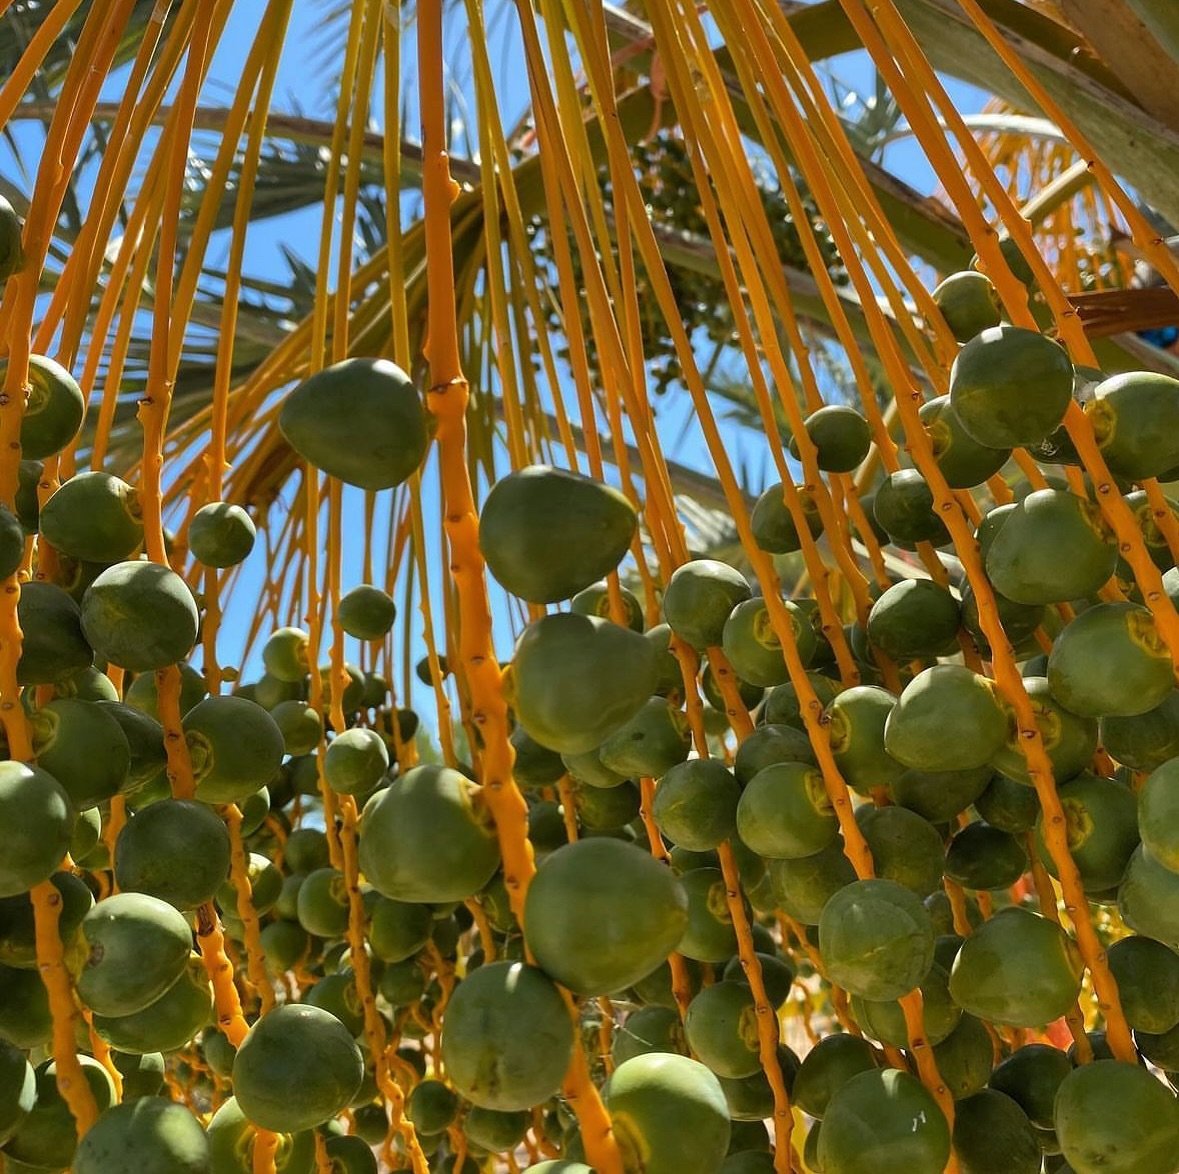 Here&rsquo;s a sneak peek of our Medjool dates. They are REALLY enjoying the increased temperatures in the desert! 🌵 

#desertfruitfarms #dates #medjooldates #onthefarm #azgrown #desertsouthwest #takealook